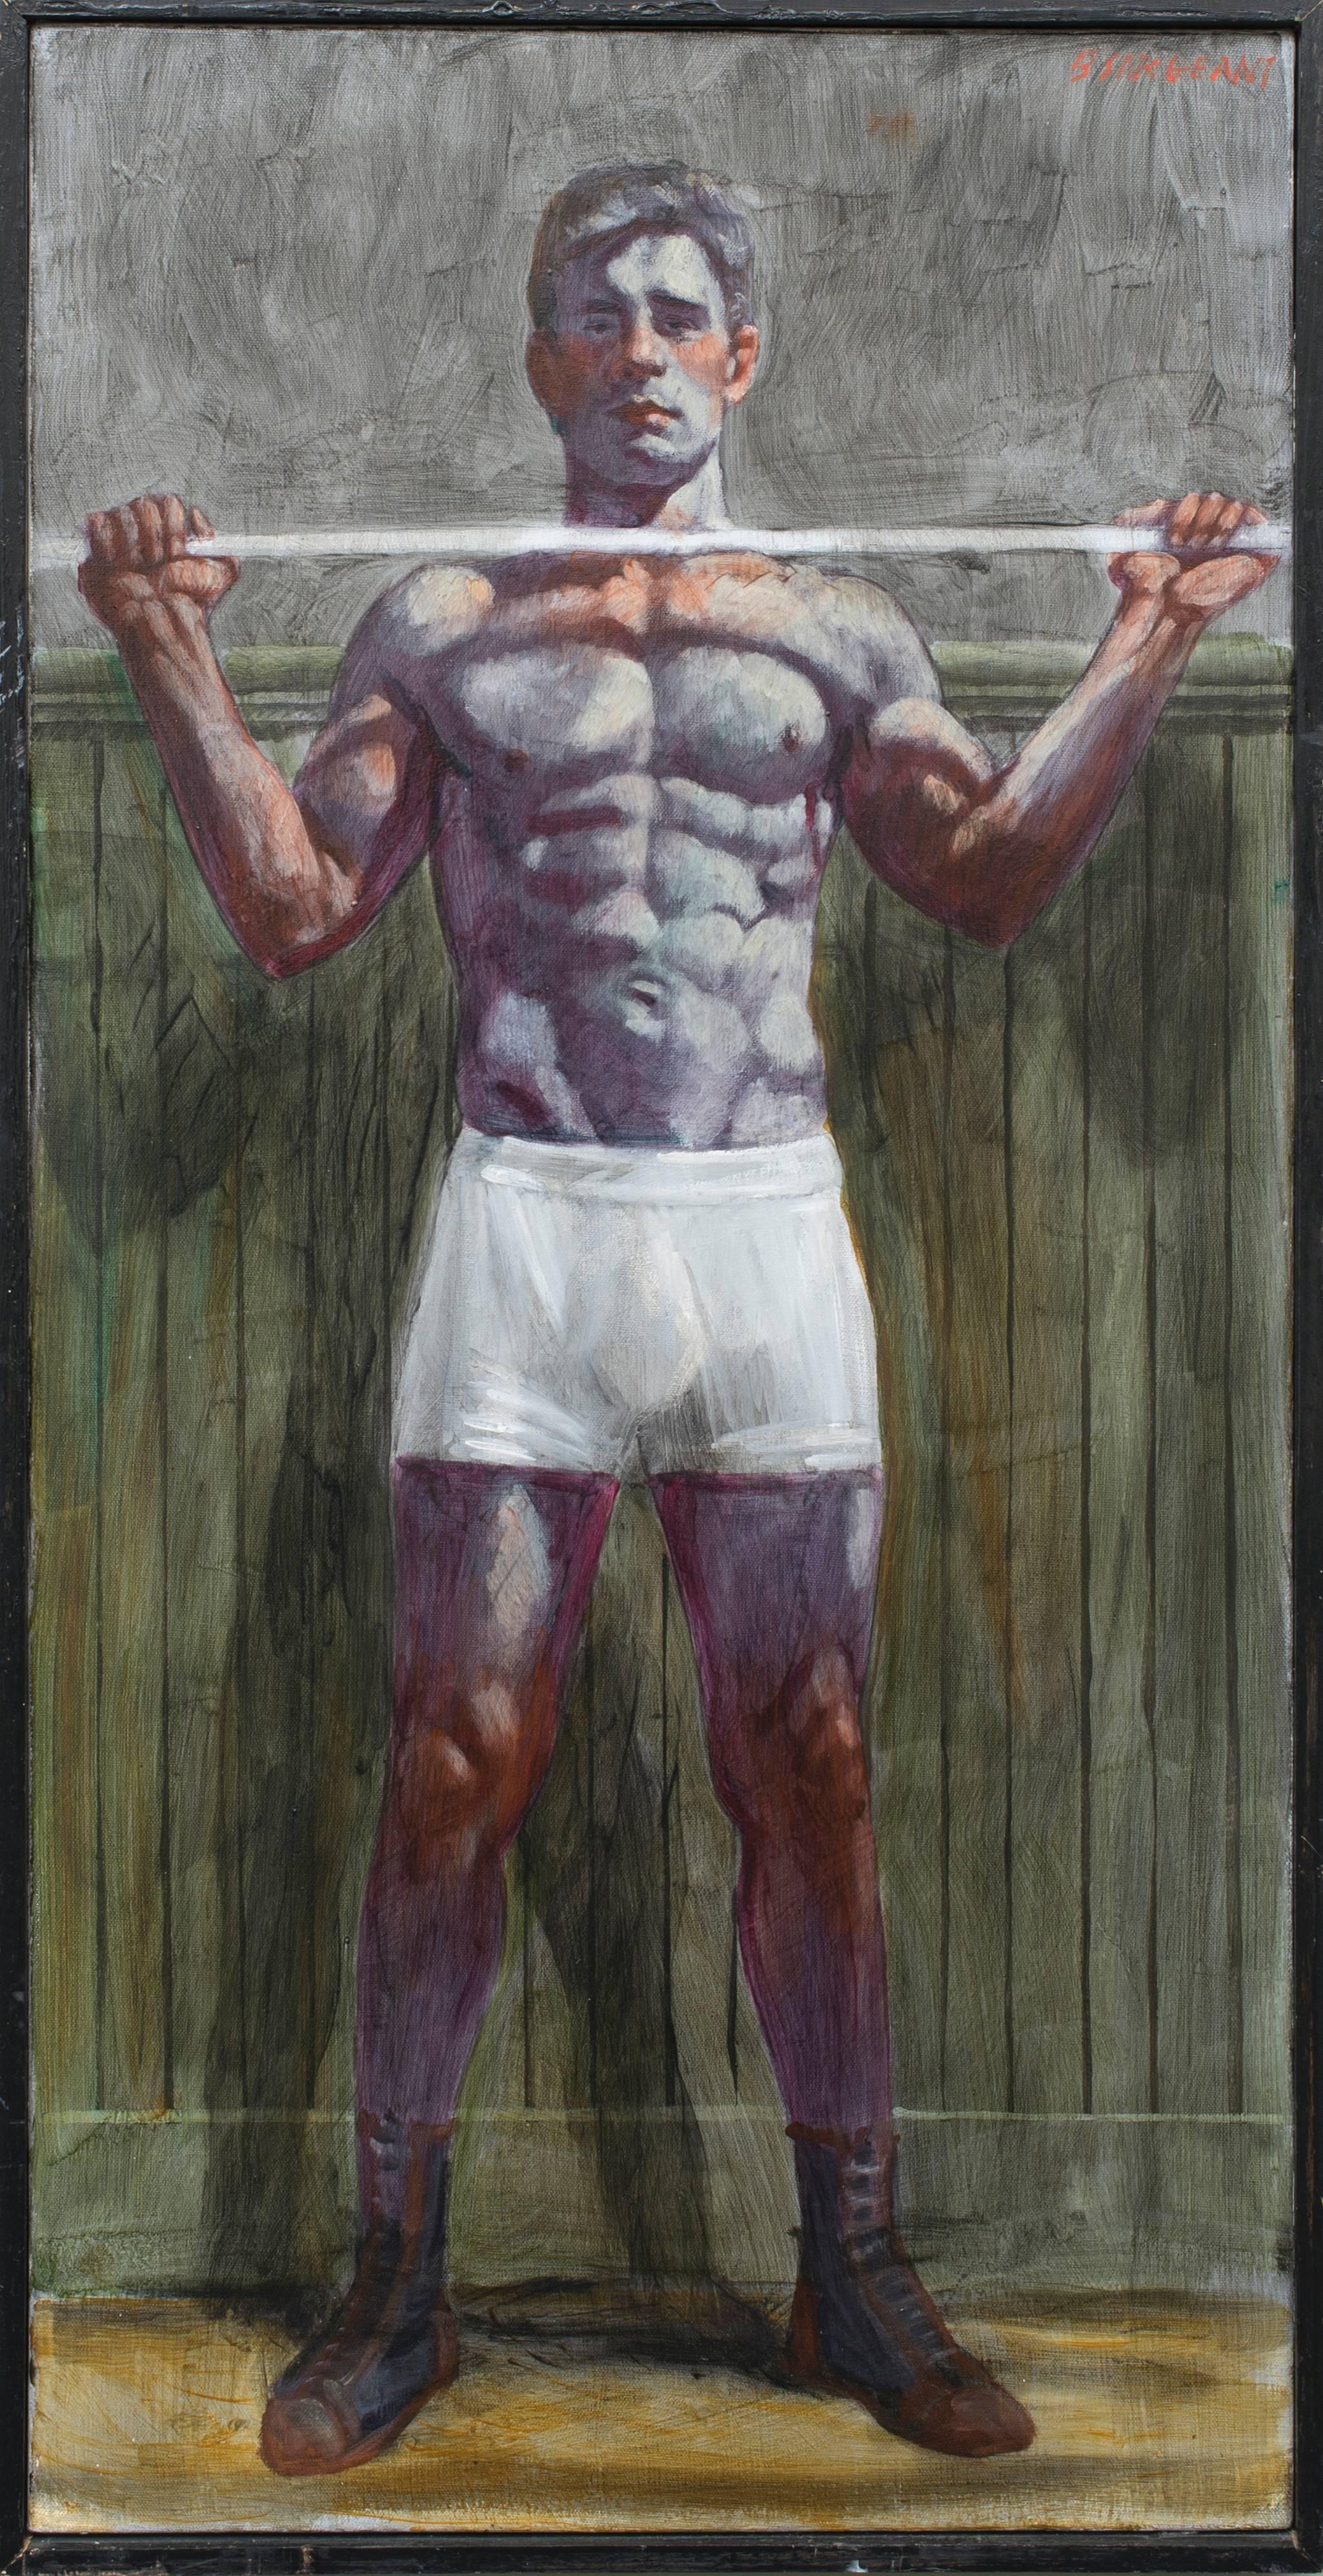 Mark Beard Figurative Painting - Standing Man with Weight Bar (Modern Portrait of Male Athlete)